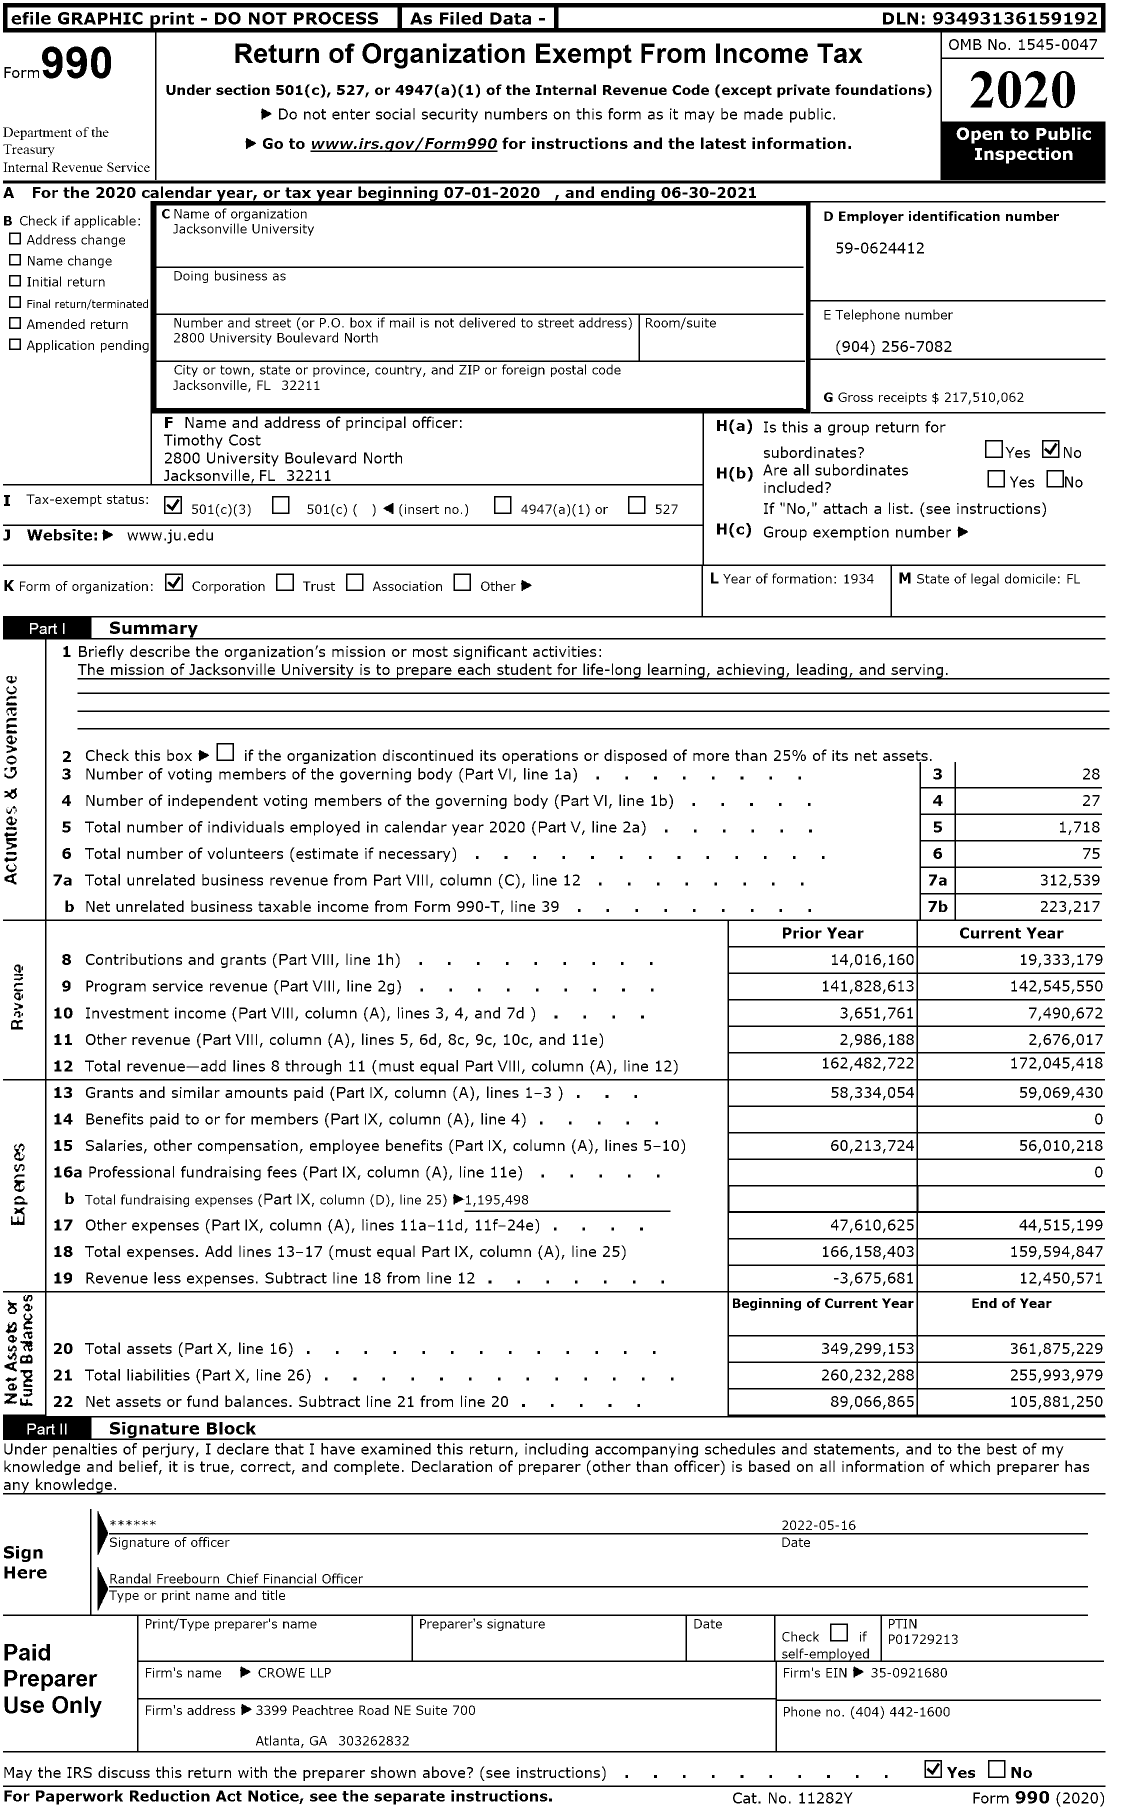 Image of first page of 2020 Form 990 for Jacksonville University (JU)